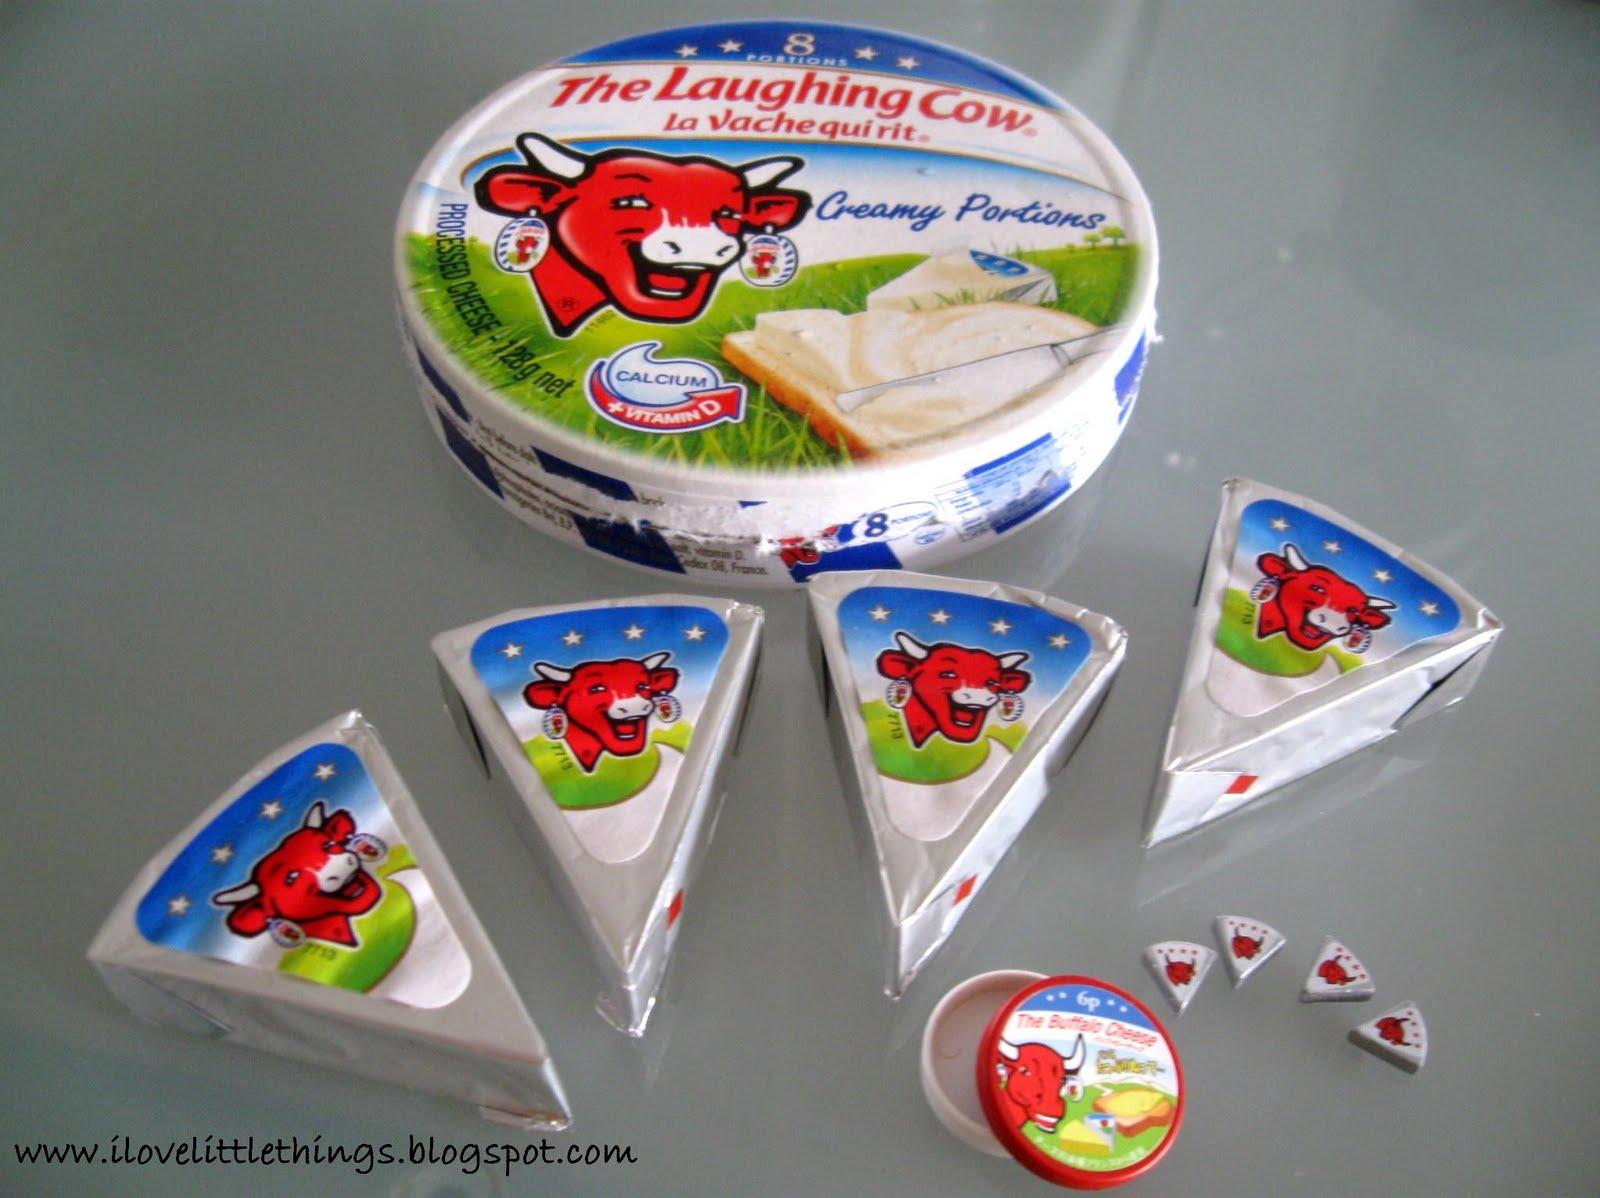 Cow Triangle Logo - Miniatures by I Love Little Things: Re-ment's Laughing Cow